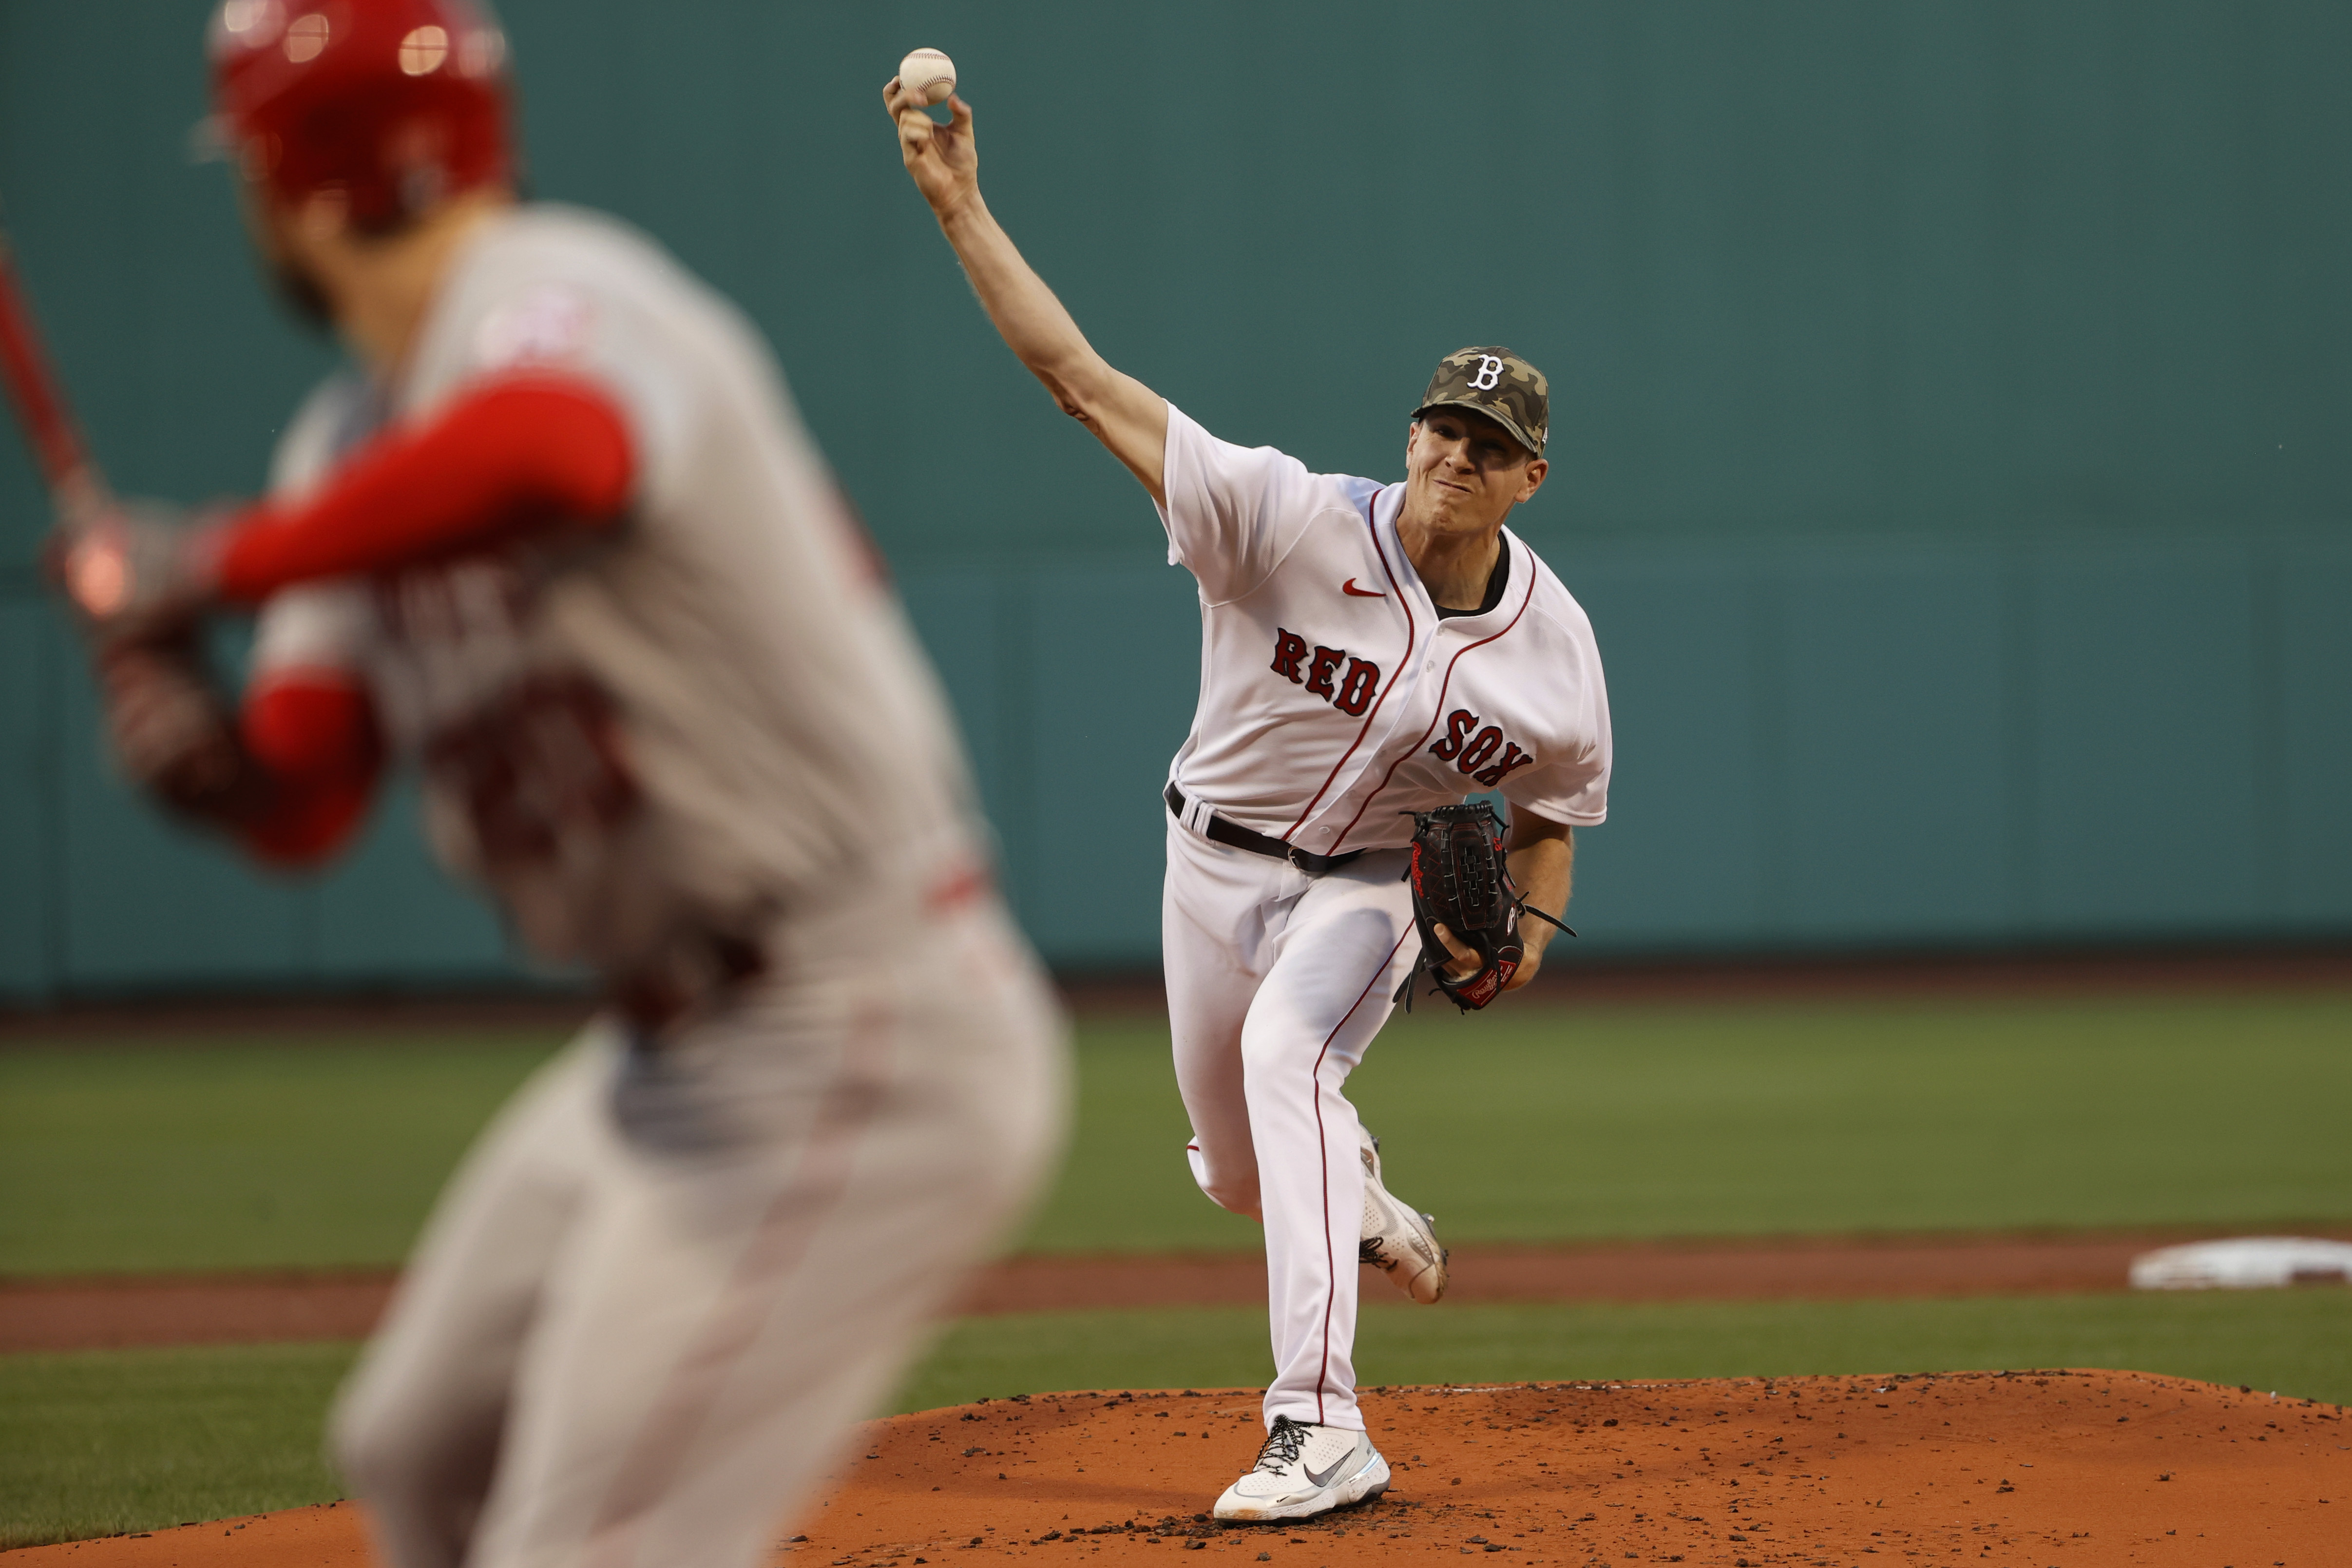 Bobby Dalbec's bright night couldn't save the Red Sox, but he